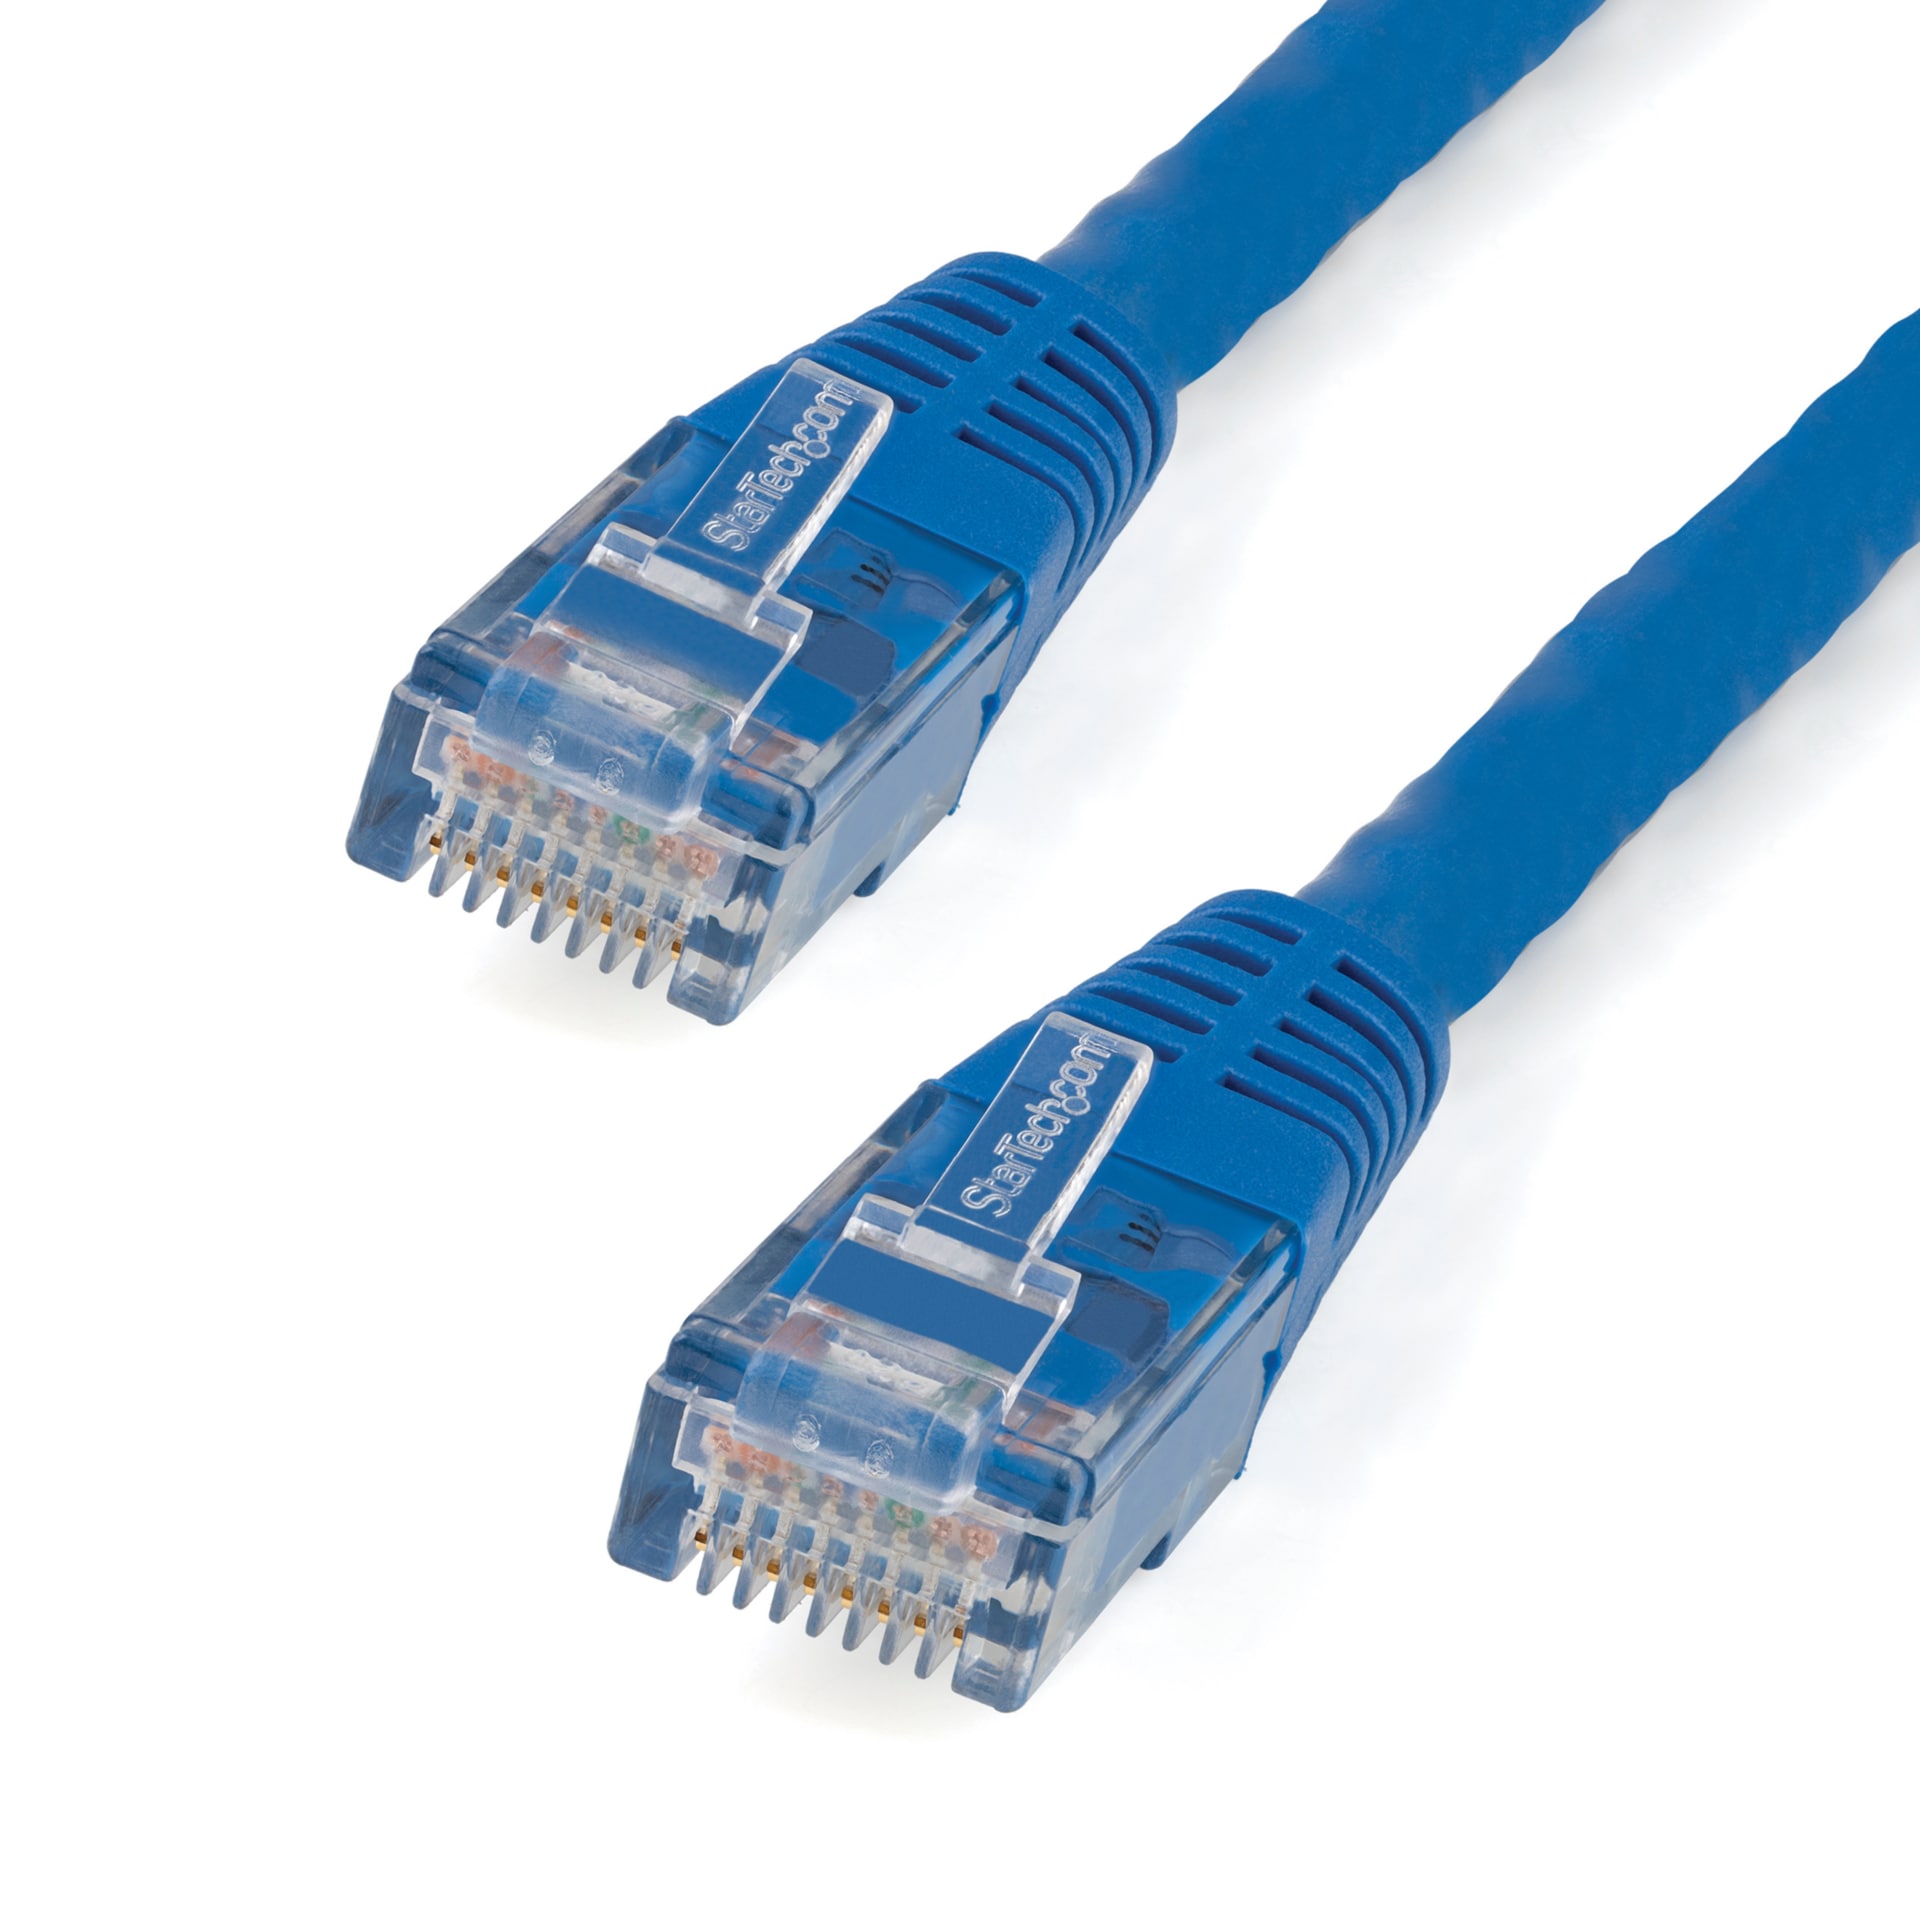 StarTech.com CAT6 Ethernet Cable 20' Blue 650MHz Molded Patch Cord PoE++